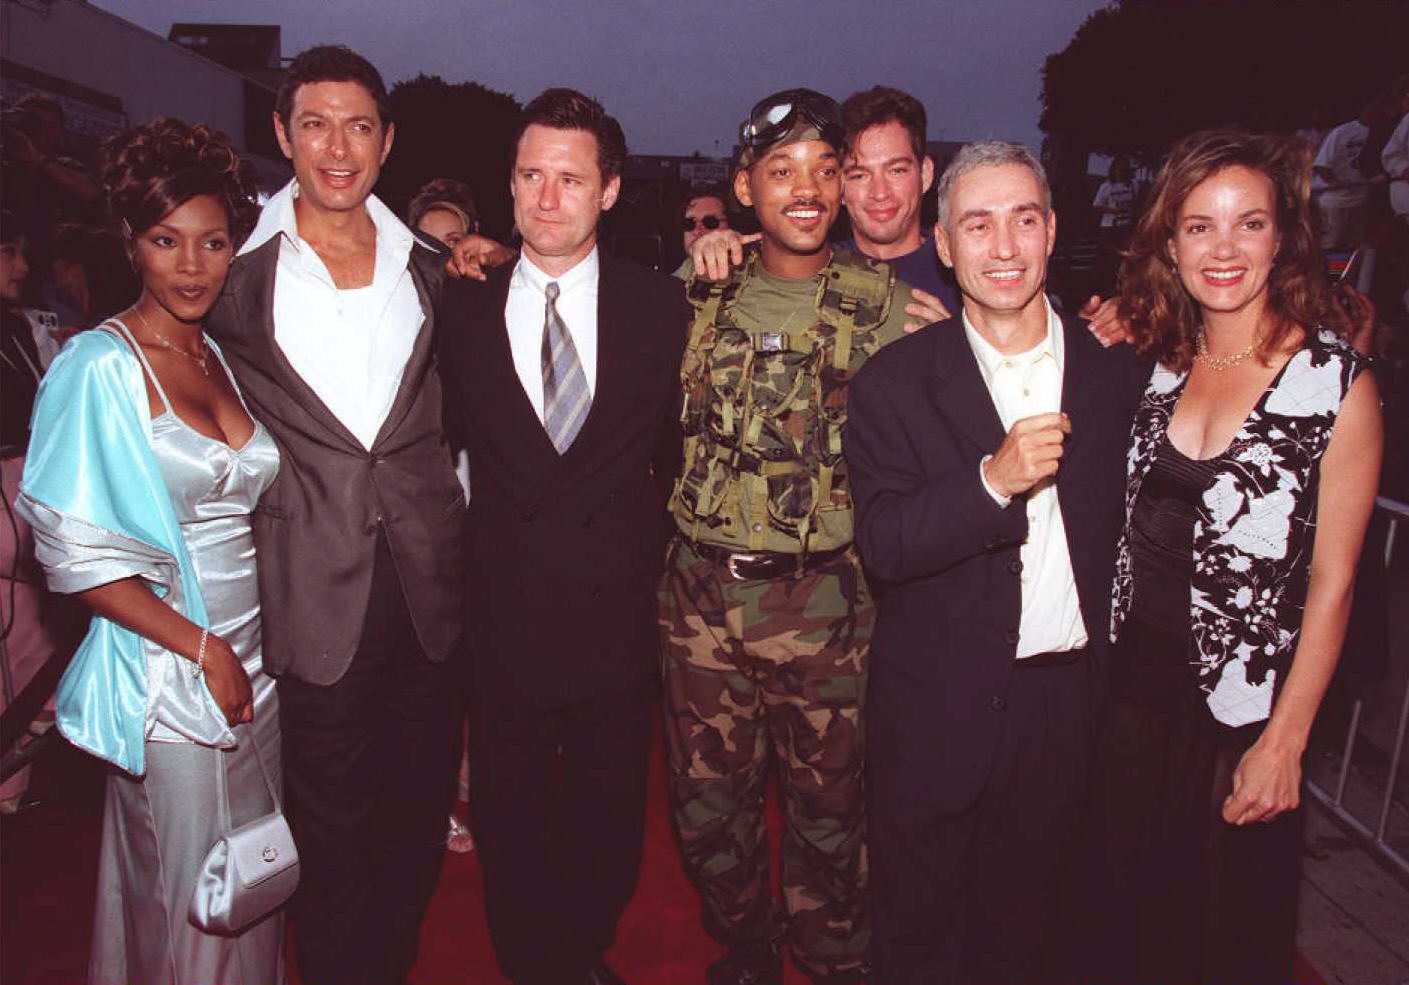 Vivica Fox, Jeff Goldblum, Bill Pullman, Will Smith, Harry Connick Jr., director Roland Emmerich, and Margaret Colin from 'Independence Day' posing for a photograph